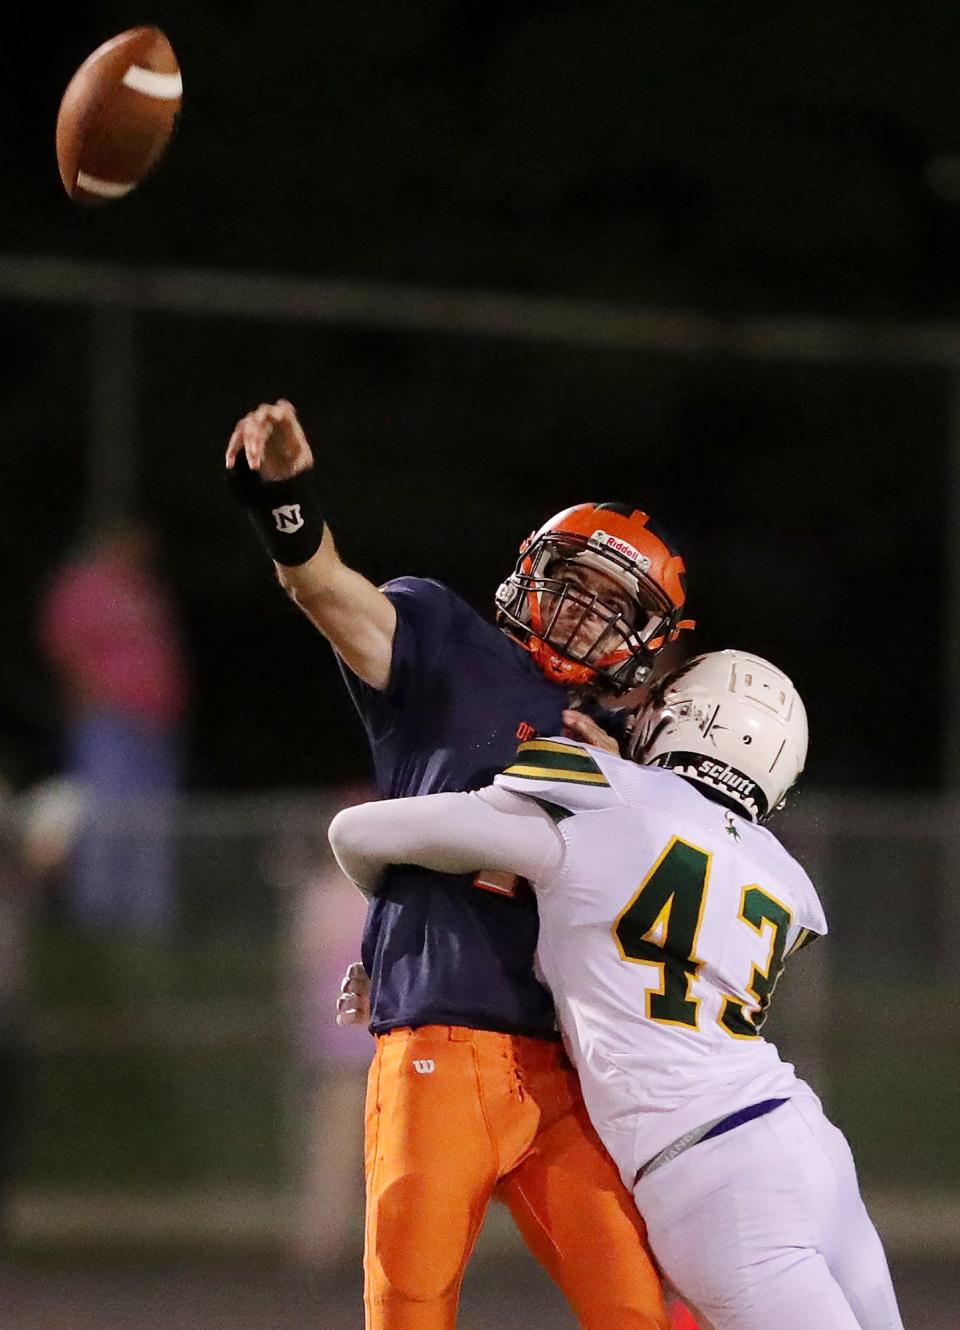 Ellet quarterback Alex Faulconer, facing, gets a pass off before being brought down by Firestone linebacker Carlo Johnson during the second half of a football game, Thursday, Oct. 7, 2021, in Akron, Ohio.